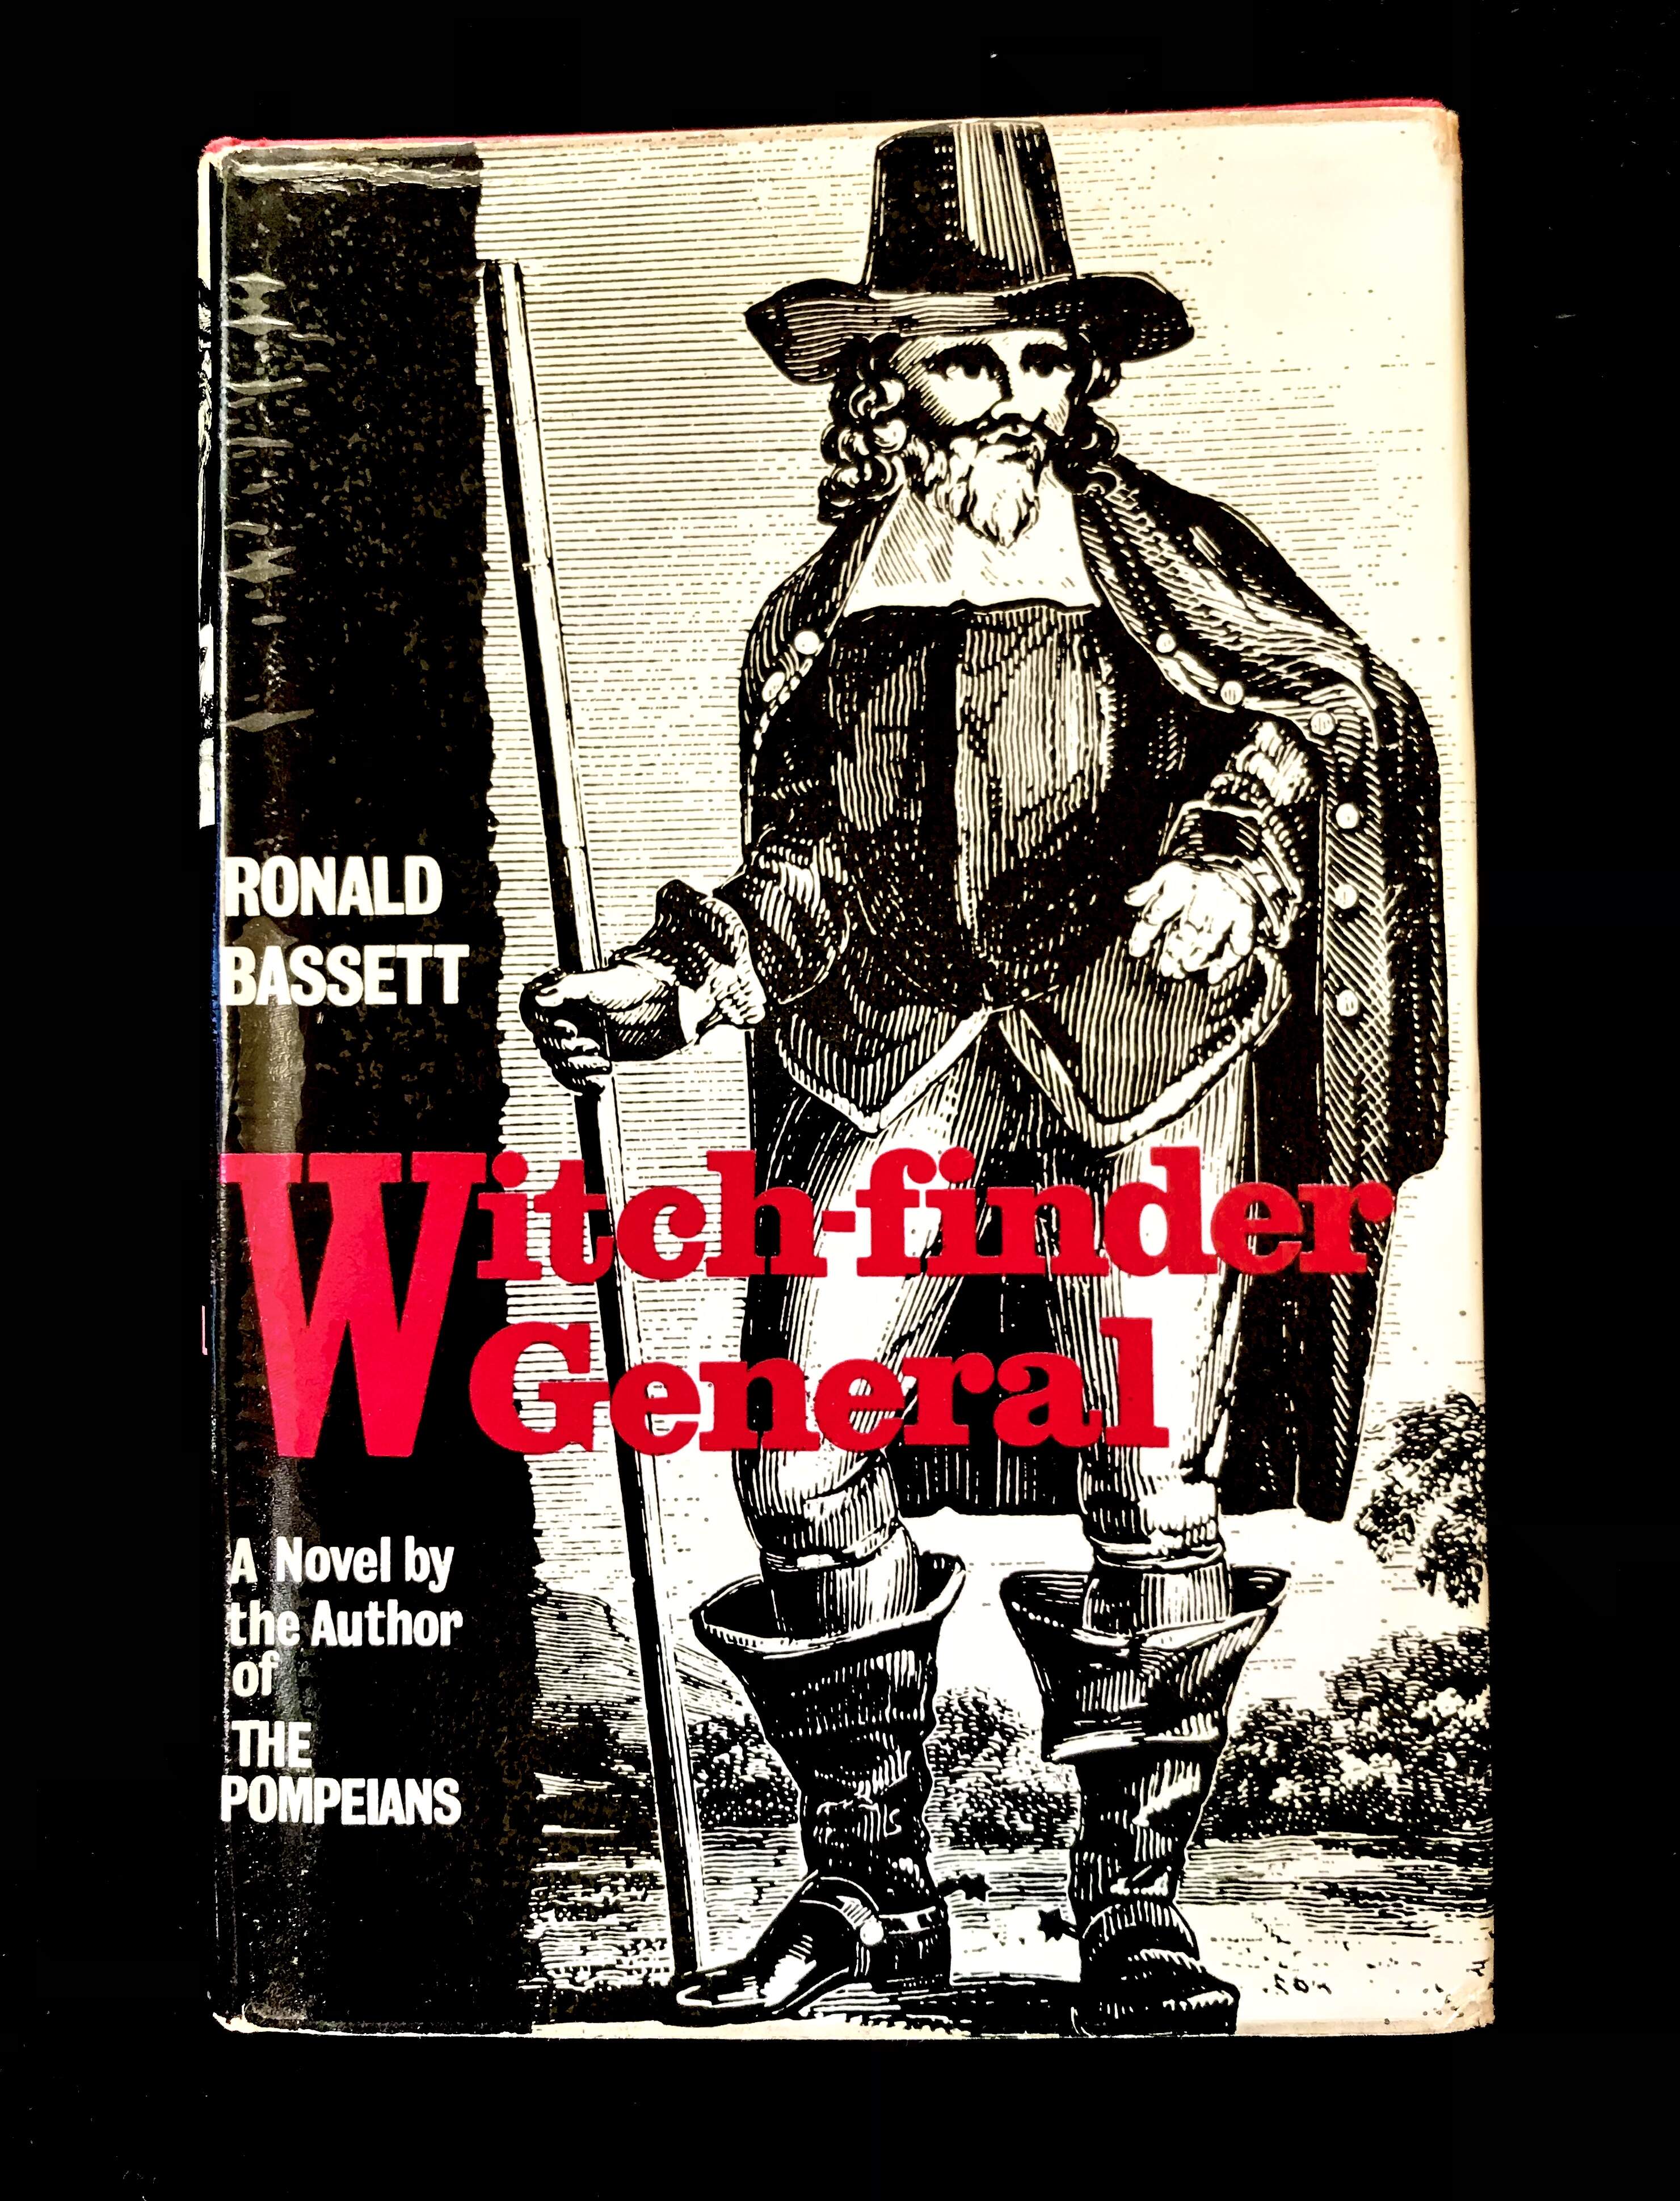 Witch-finder General by Ronald Bassett